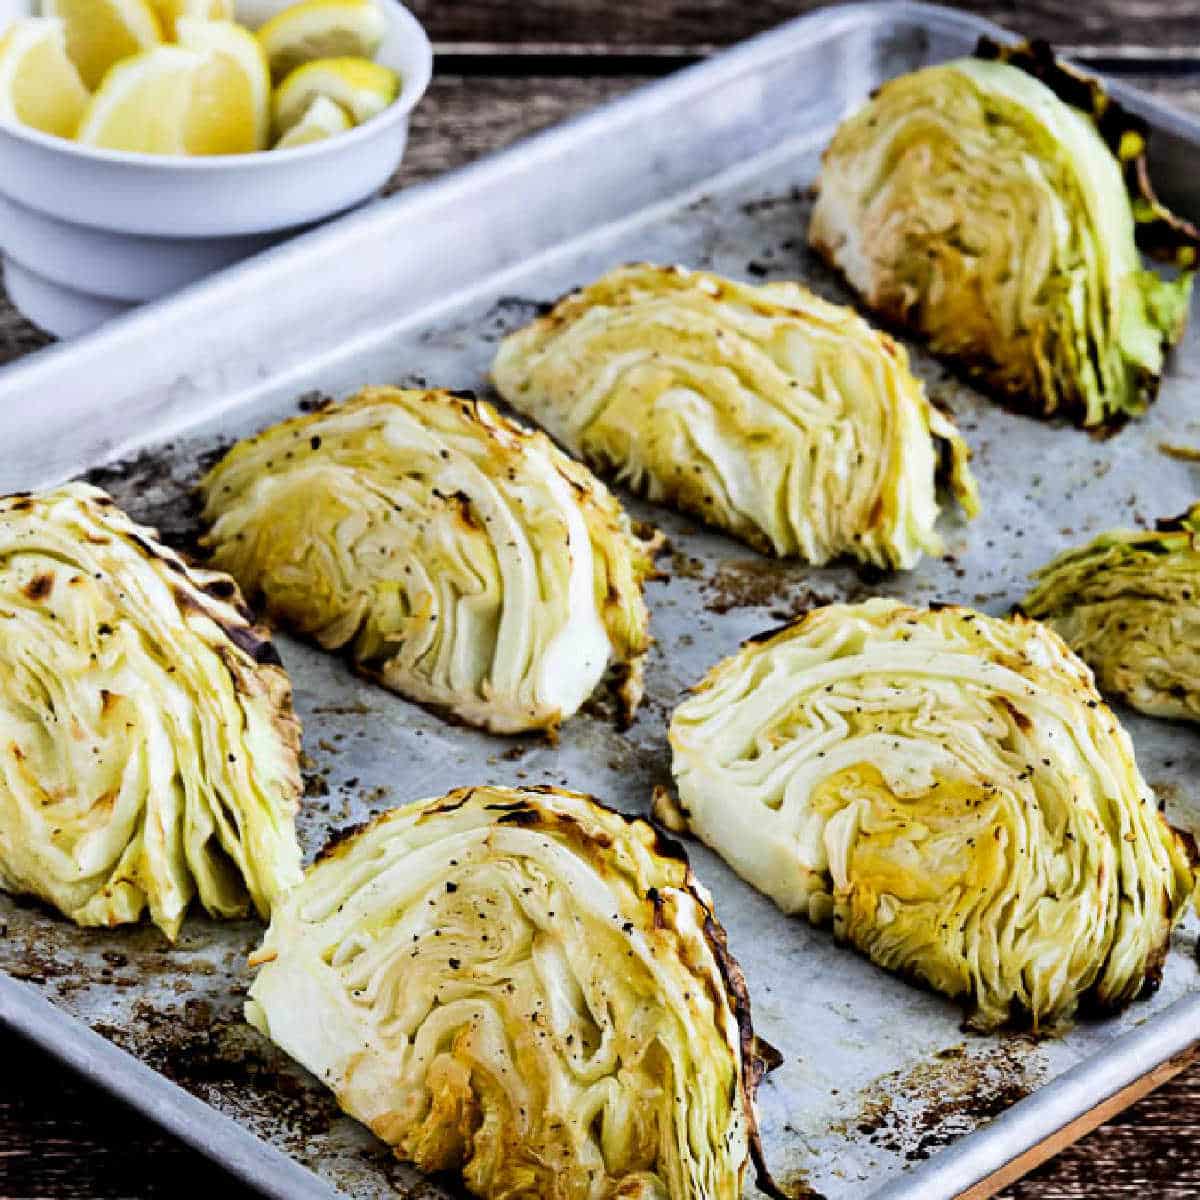 square image of Roasted Cabbage with Lemon shown on baking sheet with cut lemons in background.